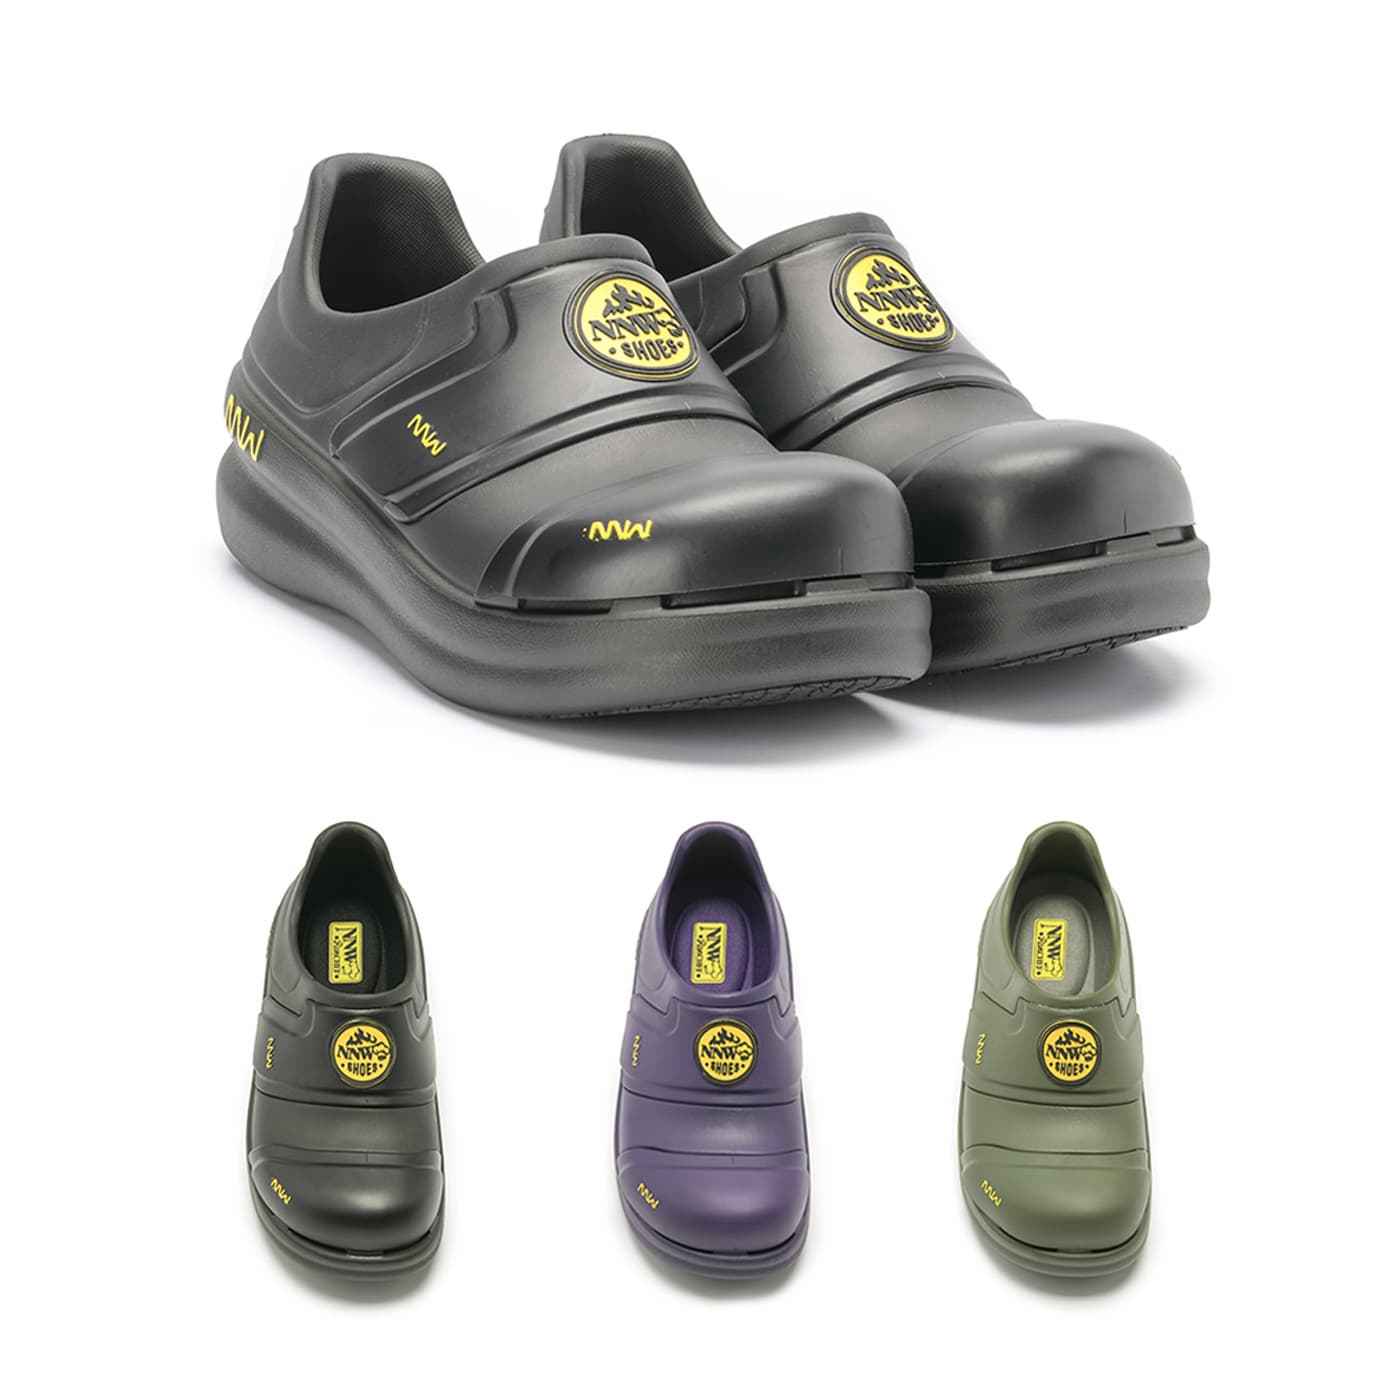 NNW Running Chef Shoes _ Non_slip Kitchen shoes _ Cooking shoes _ Kitchen safety shoes